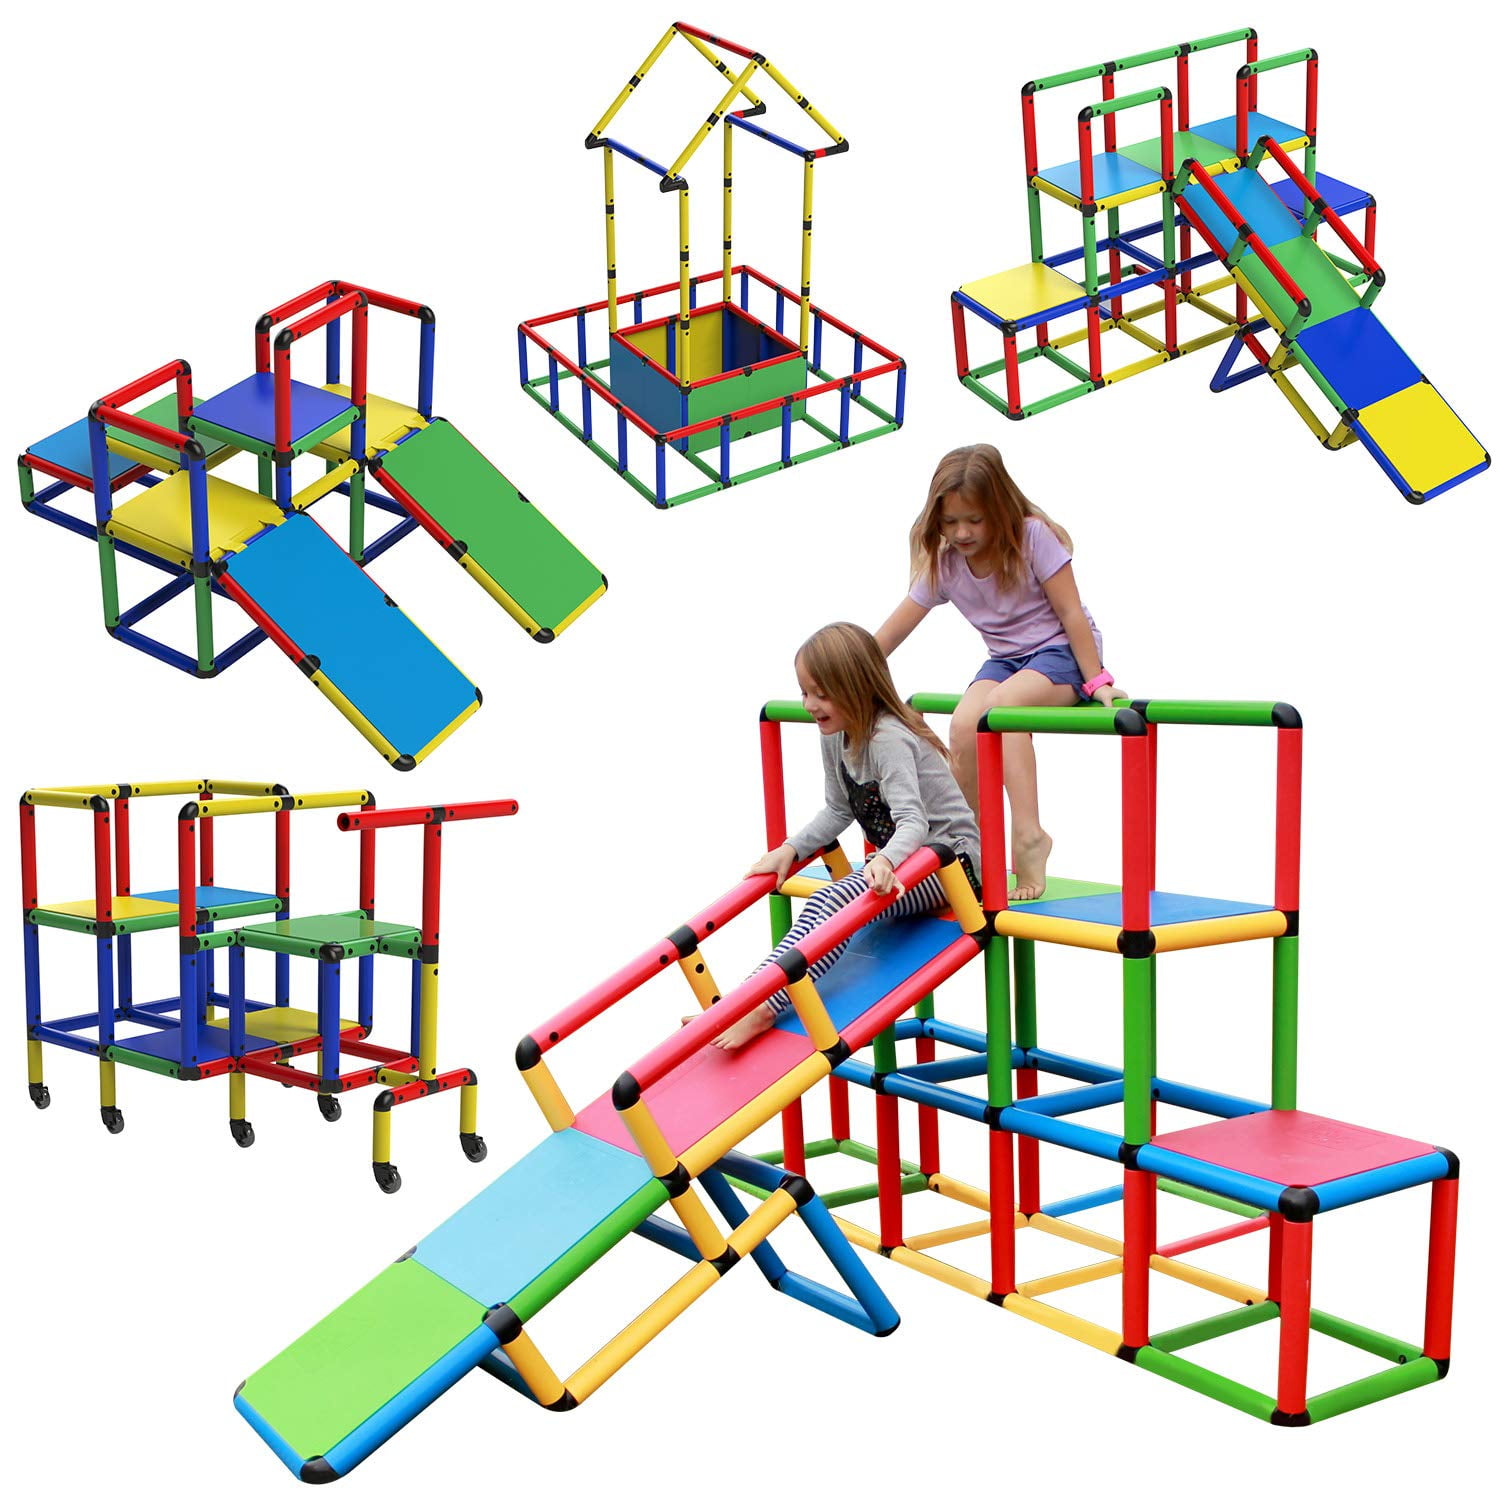 Funphix Create and Play Life Size Structures Standard Set 199 PCS 